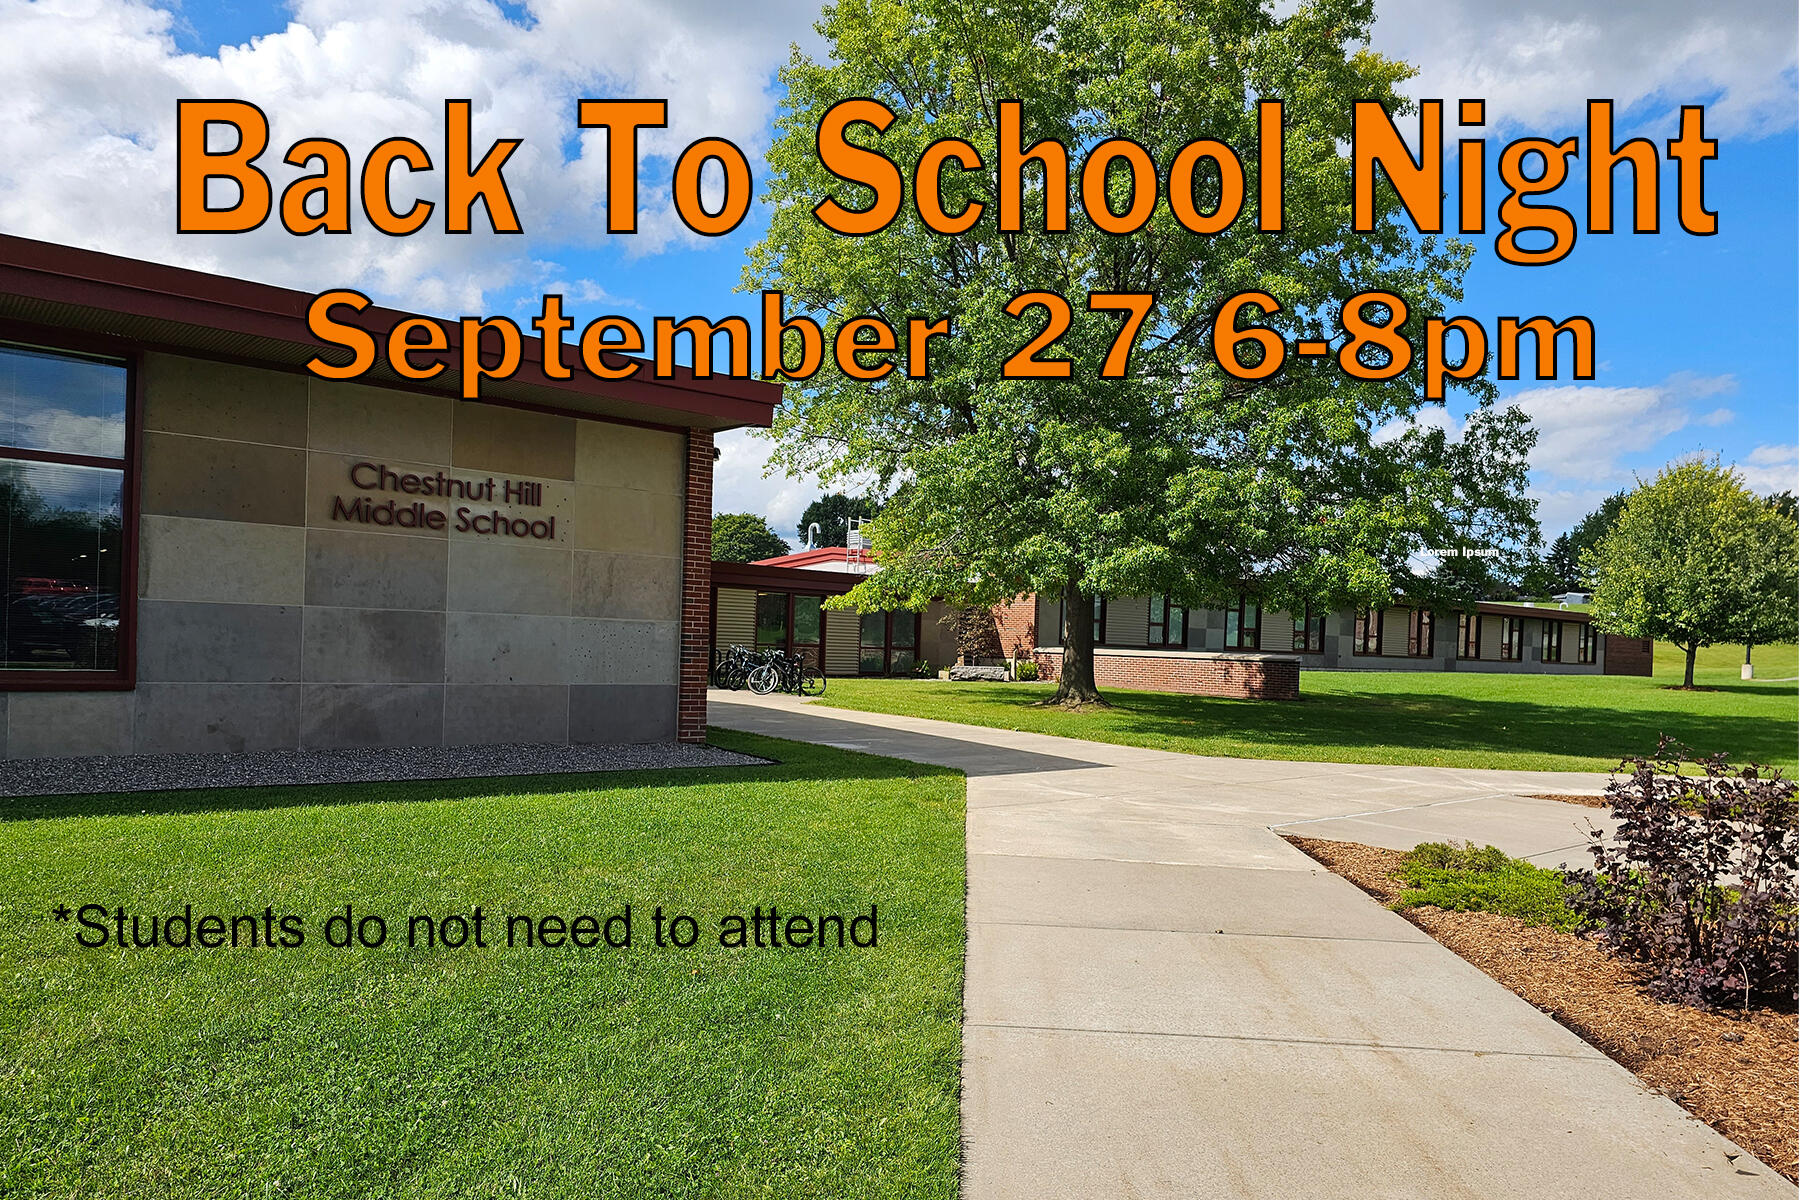 Back to School Night September 27 6-8pm